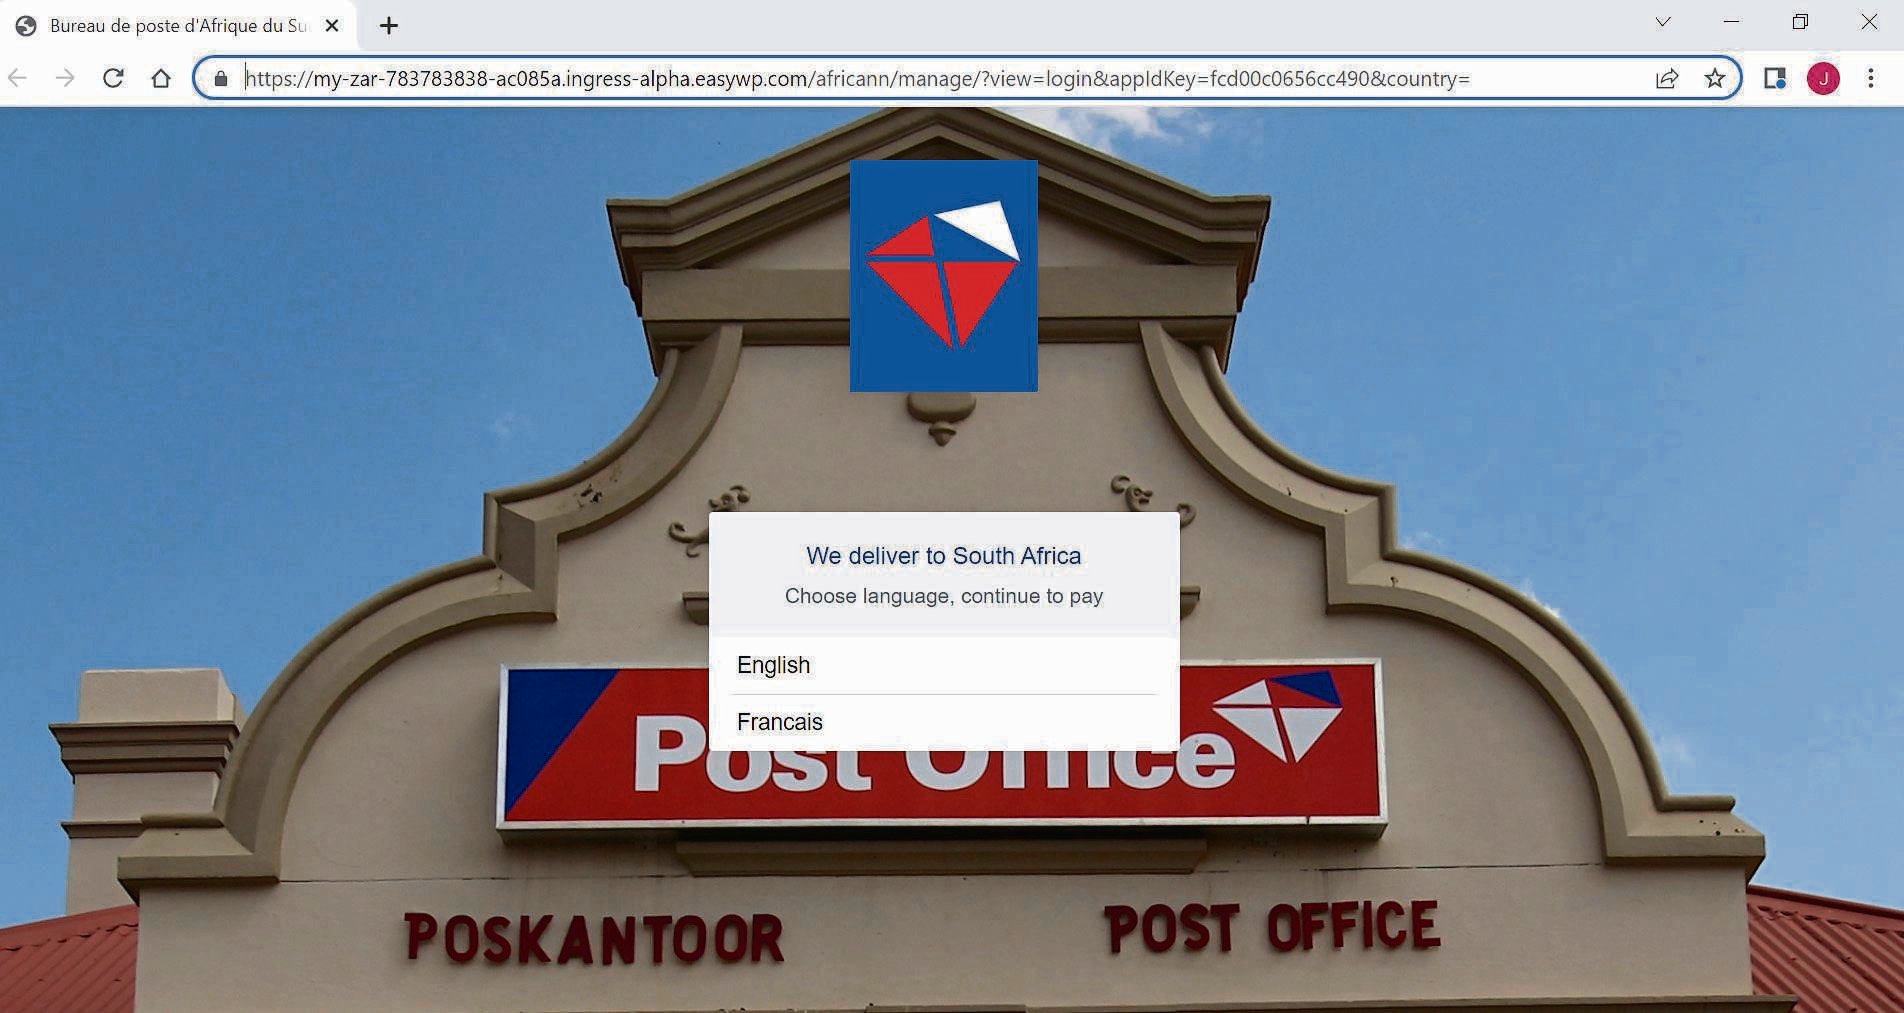 The post office has warned users of another scam. FOTO: 